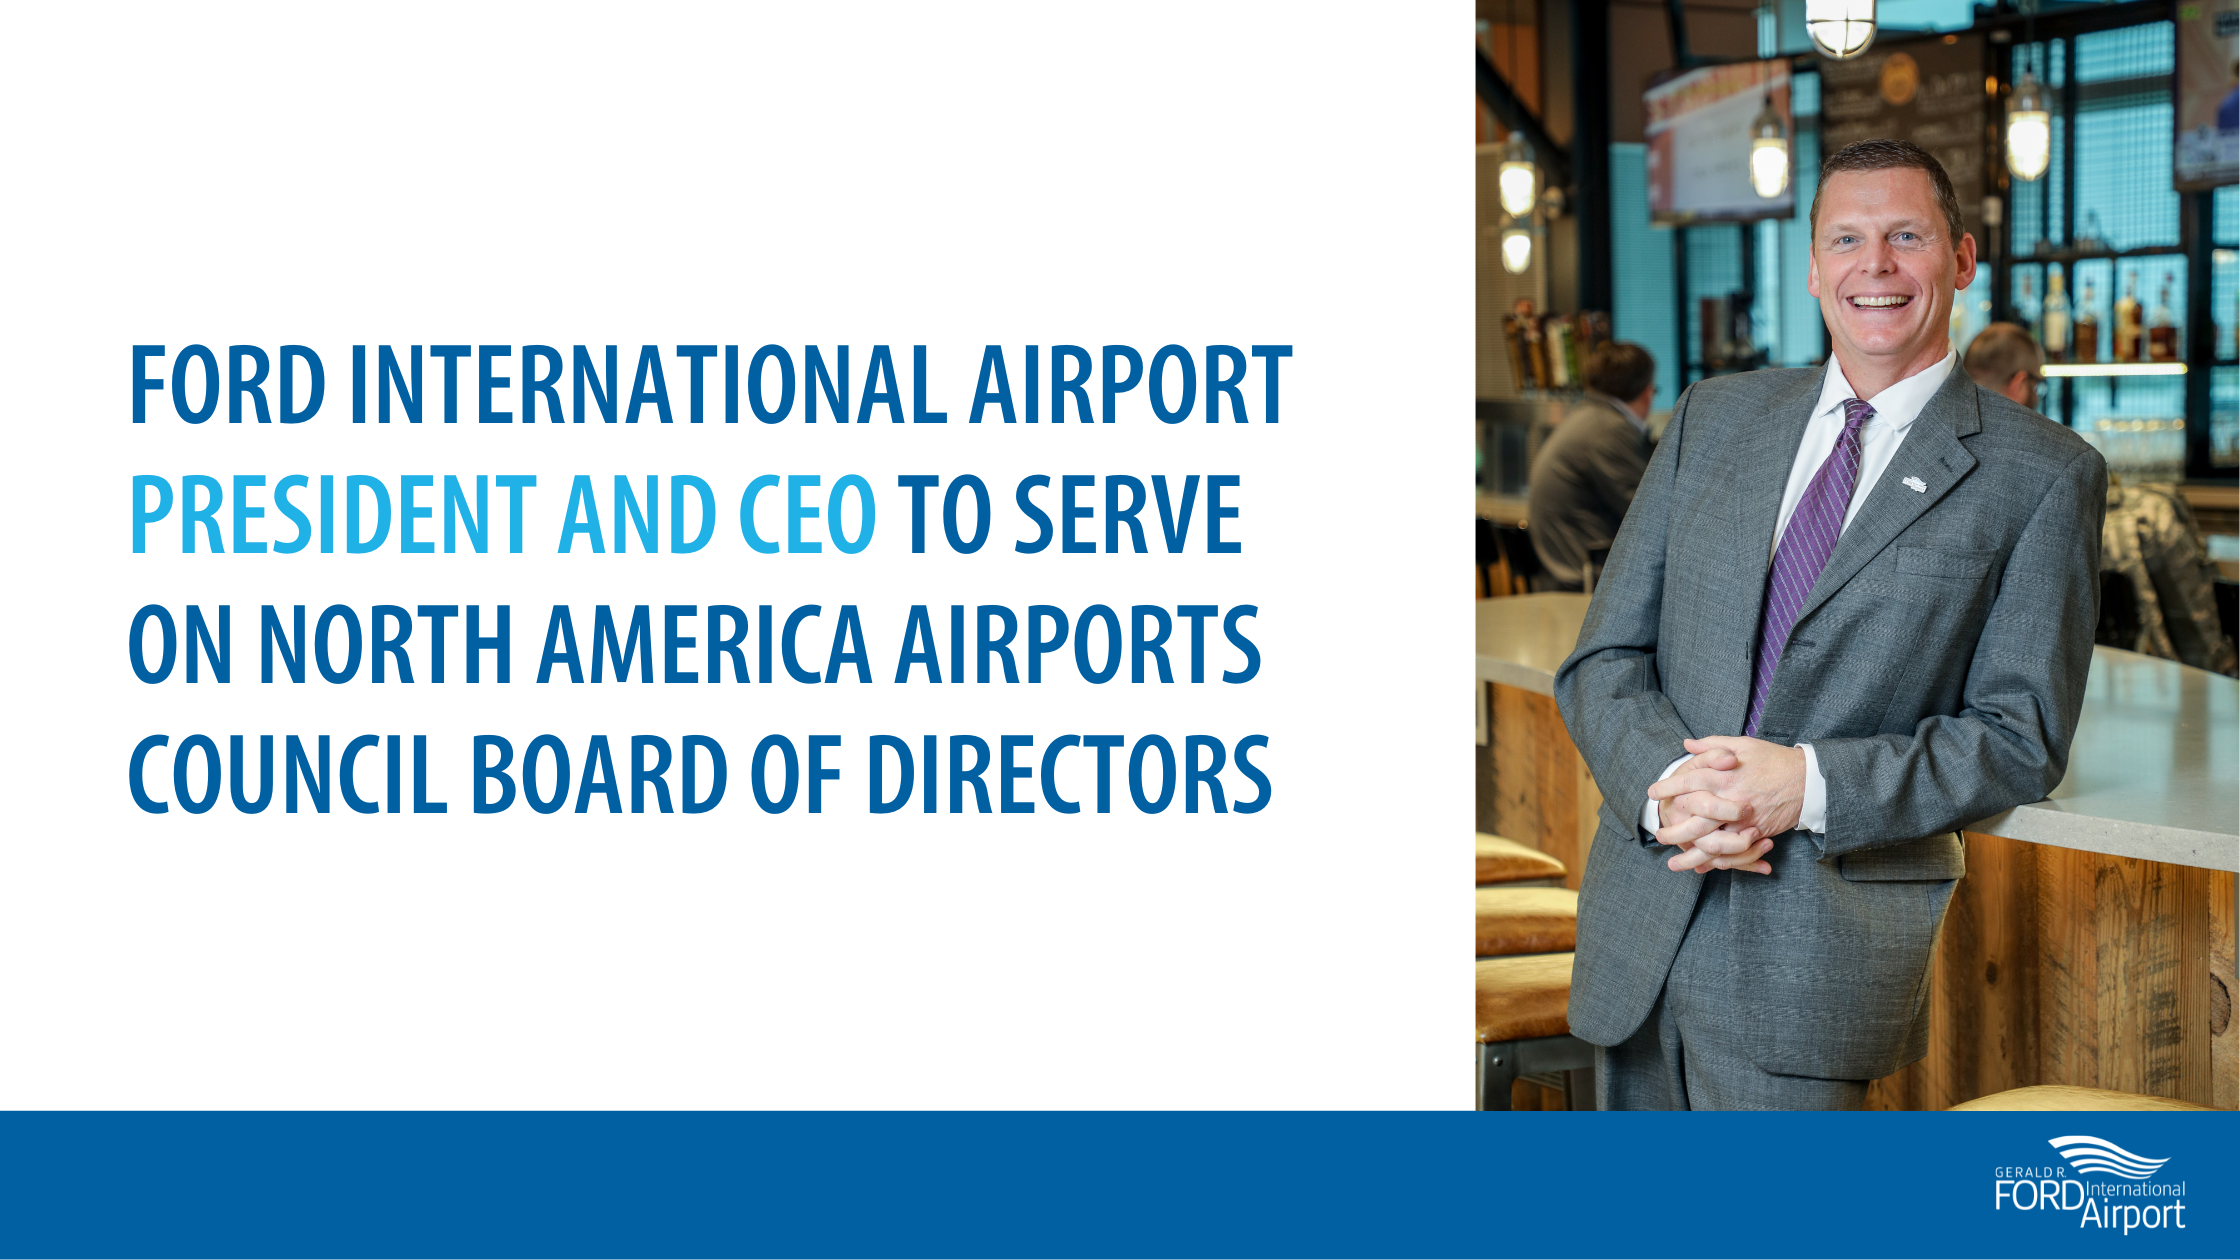 Ford International Airport President and CEO to Serve on North America Airports Council Board of Directors